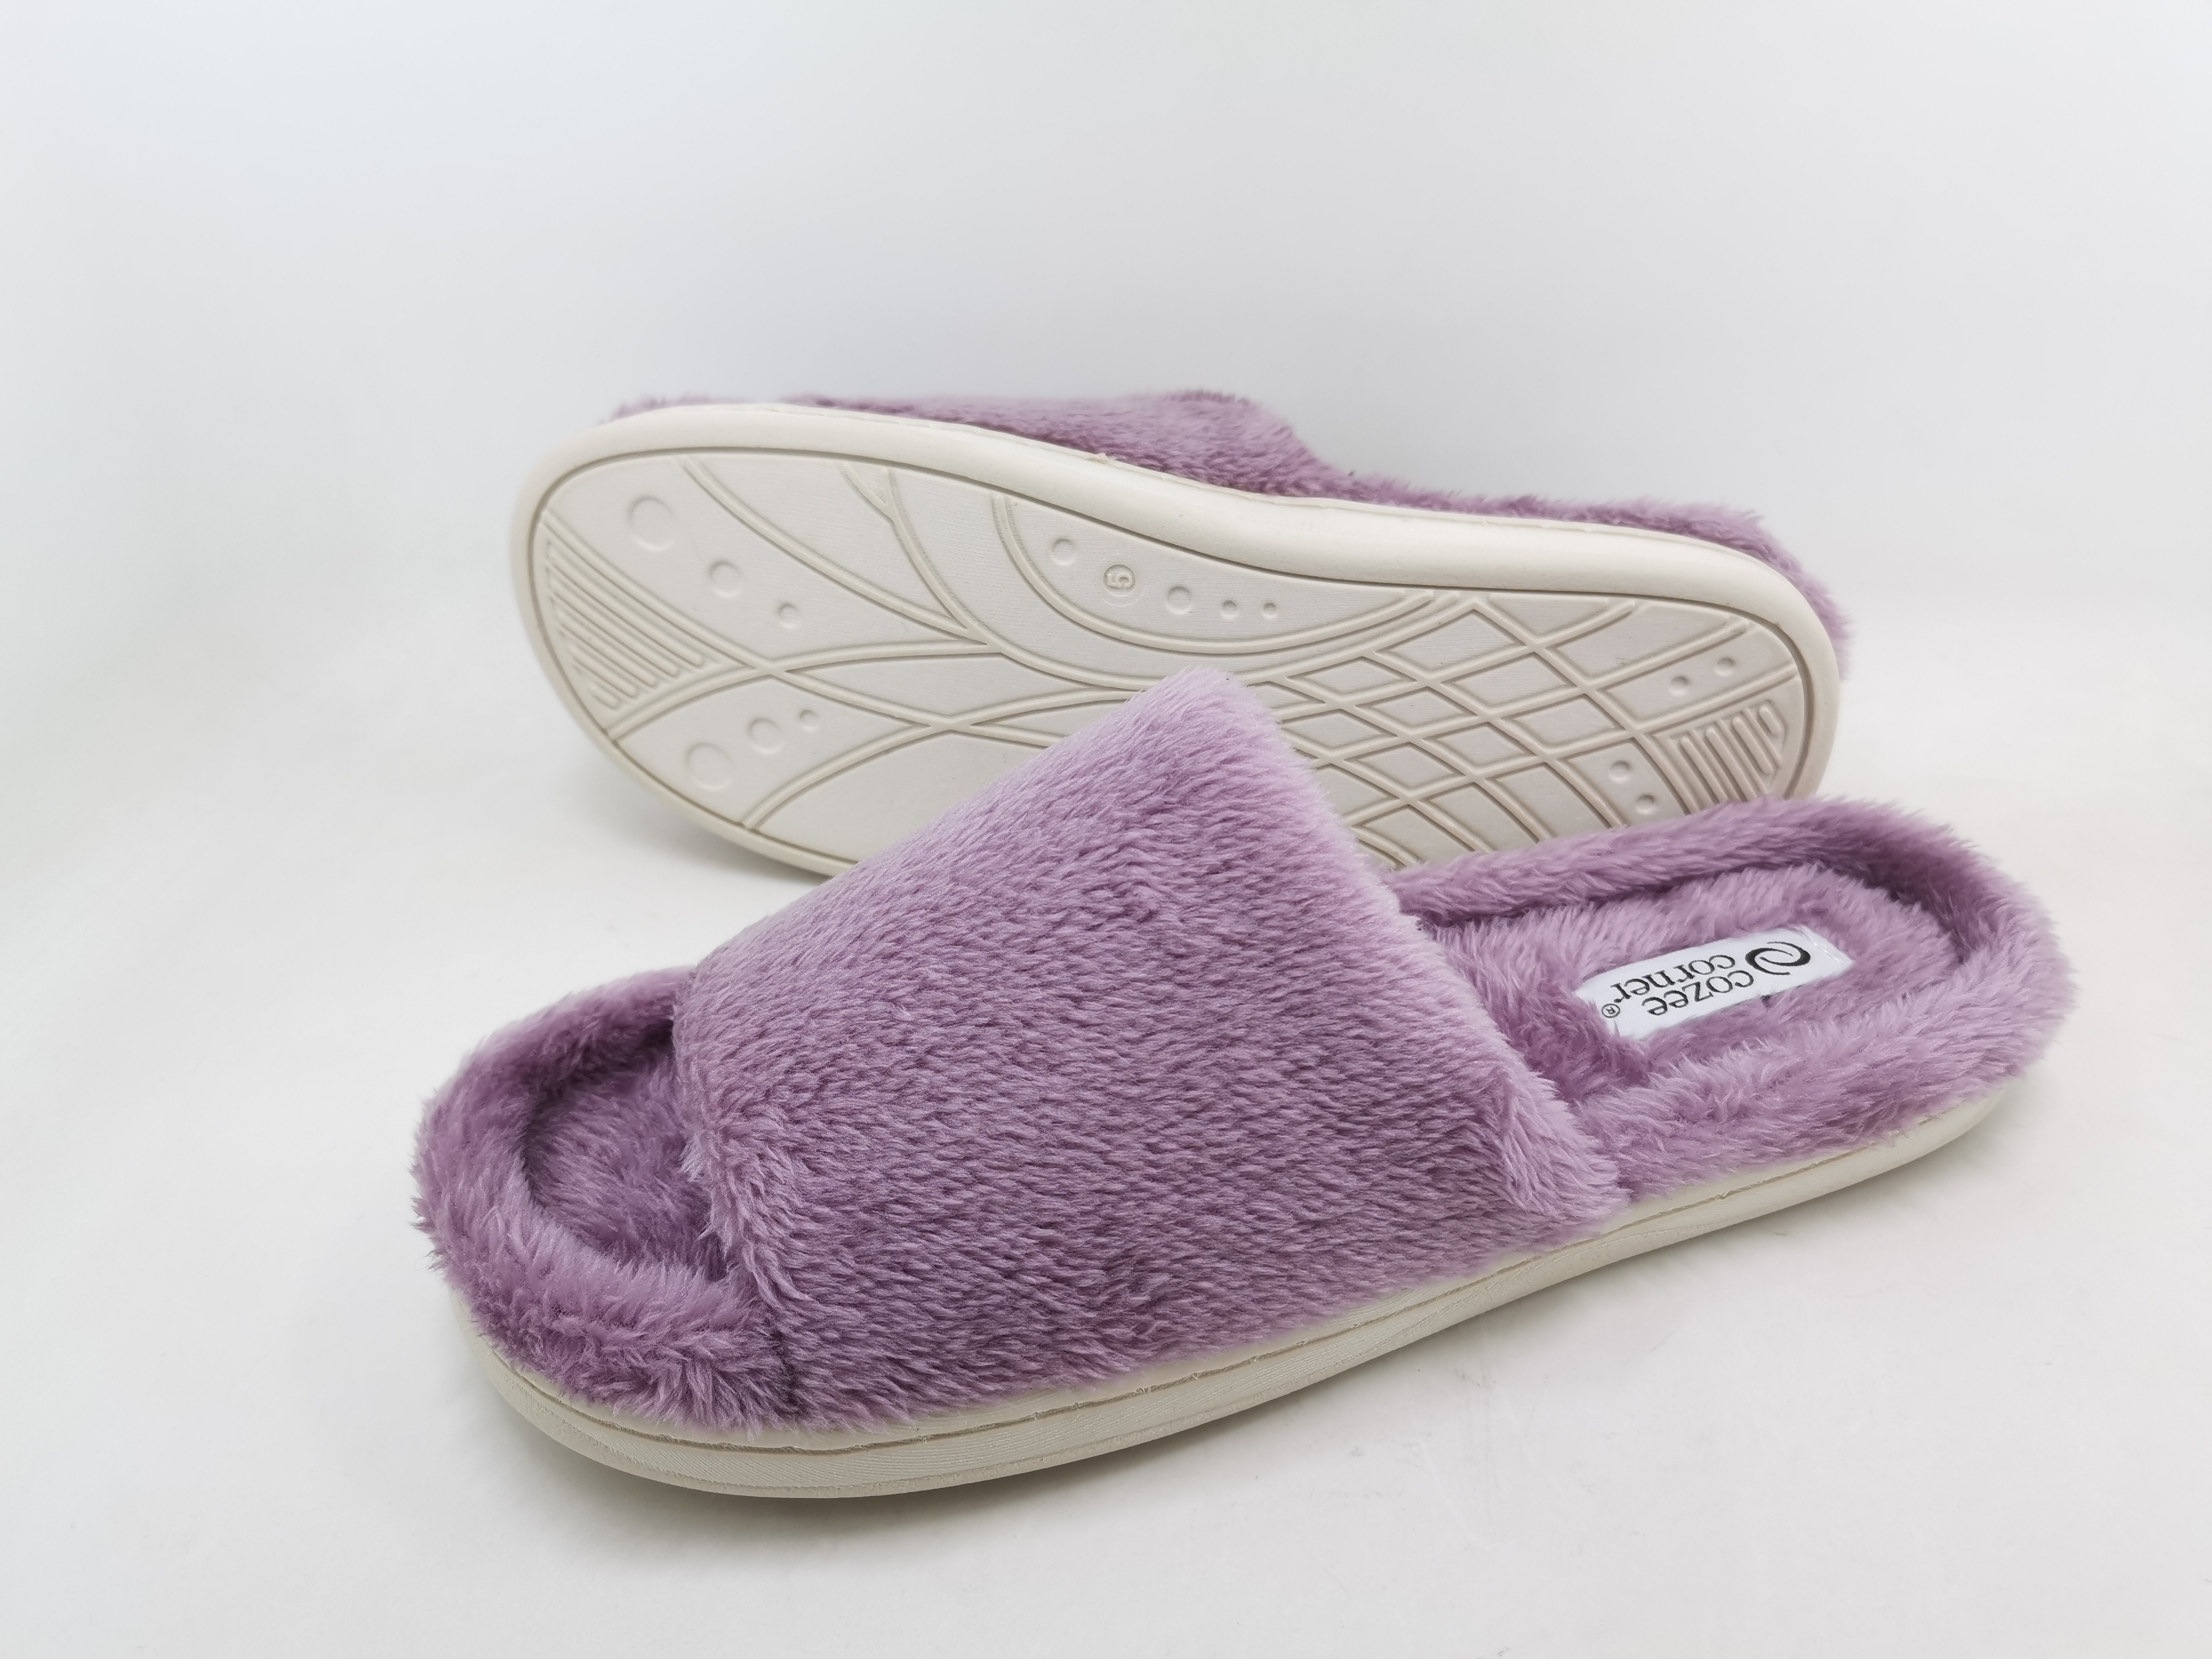 Women’s Open Toe House Slippers Memory Foam, Comfy Cozy Slip-on Indoor Slippers for Women Non-Slip, Soft Cute Womens Flannel Home Bedroom Scuff Slippers